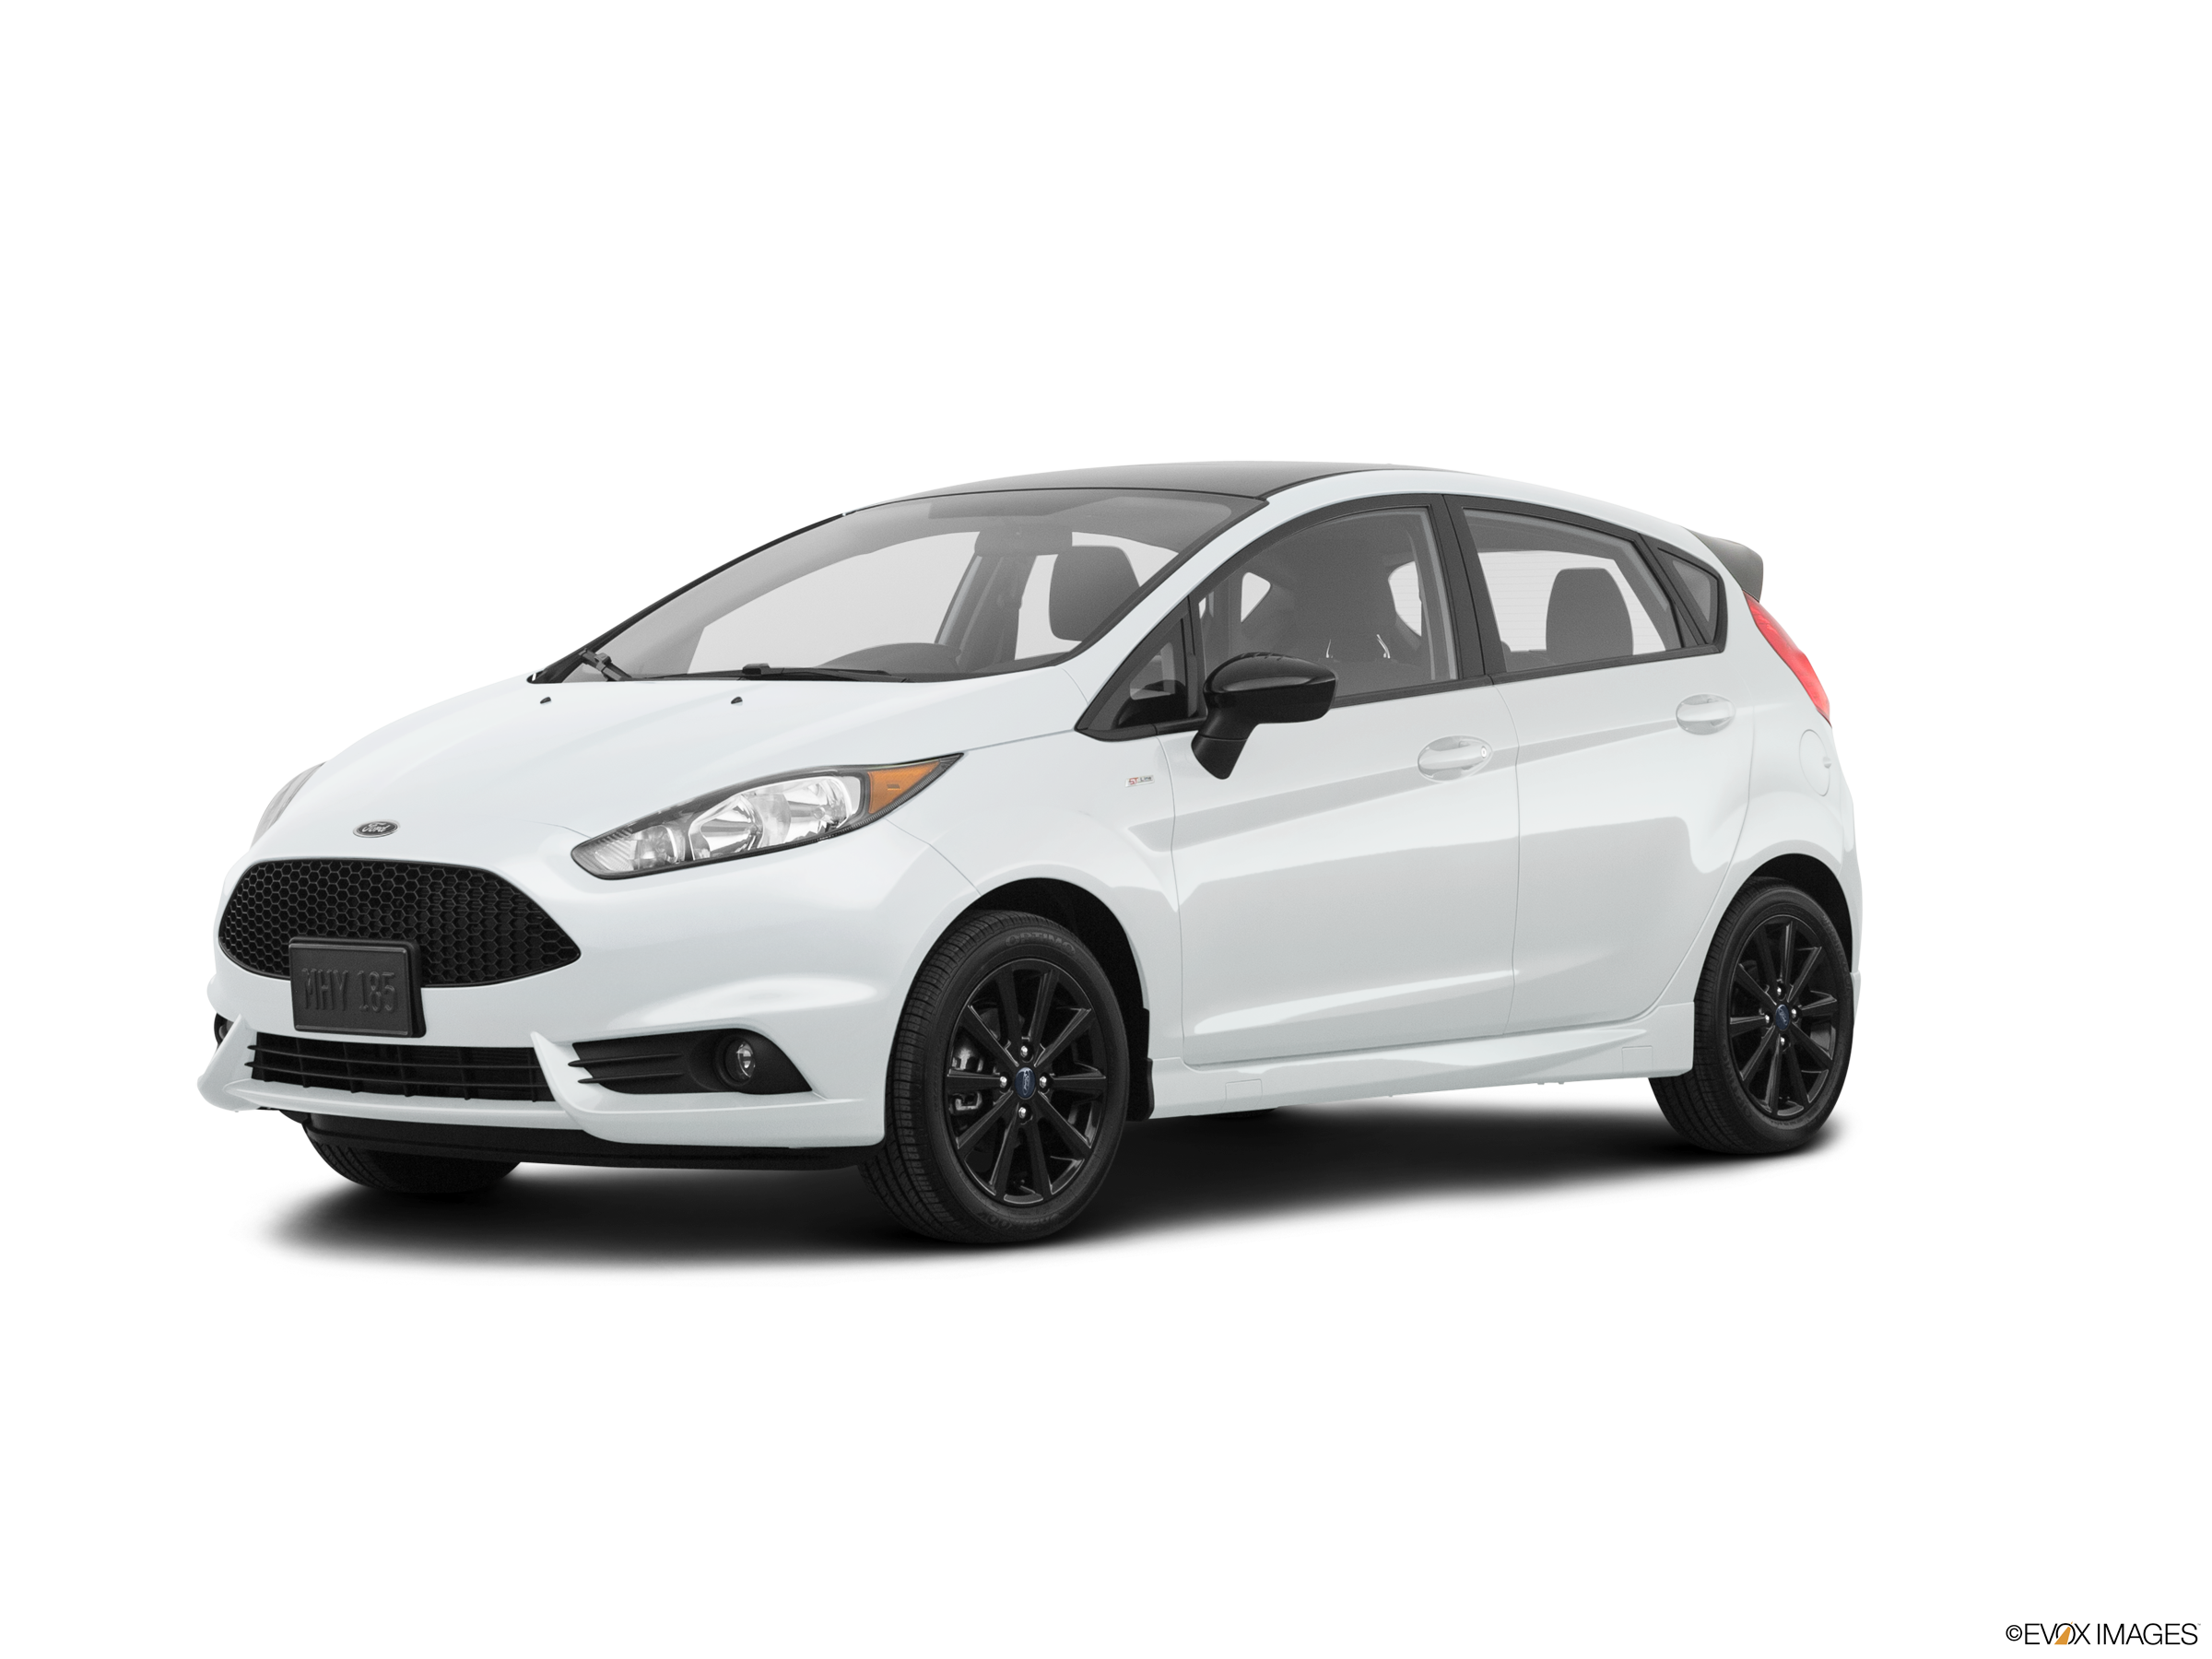 2019 Ford Fiesta ST Review, Pricing, and Specs